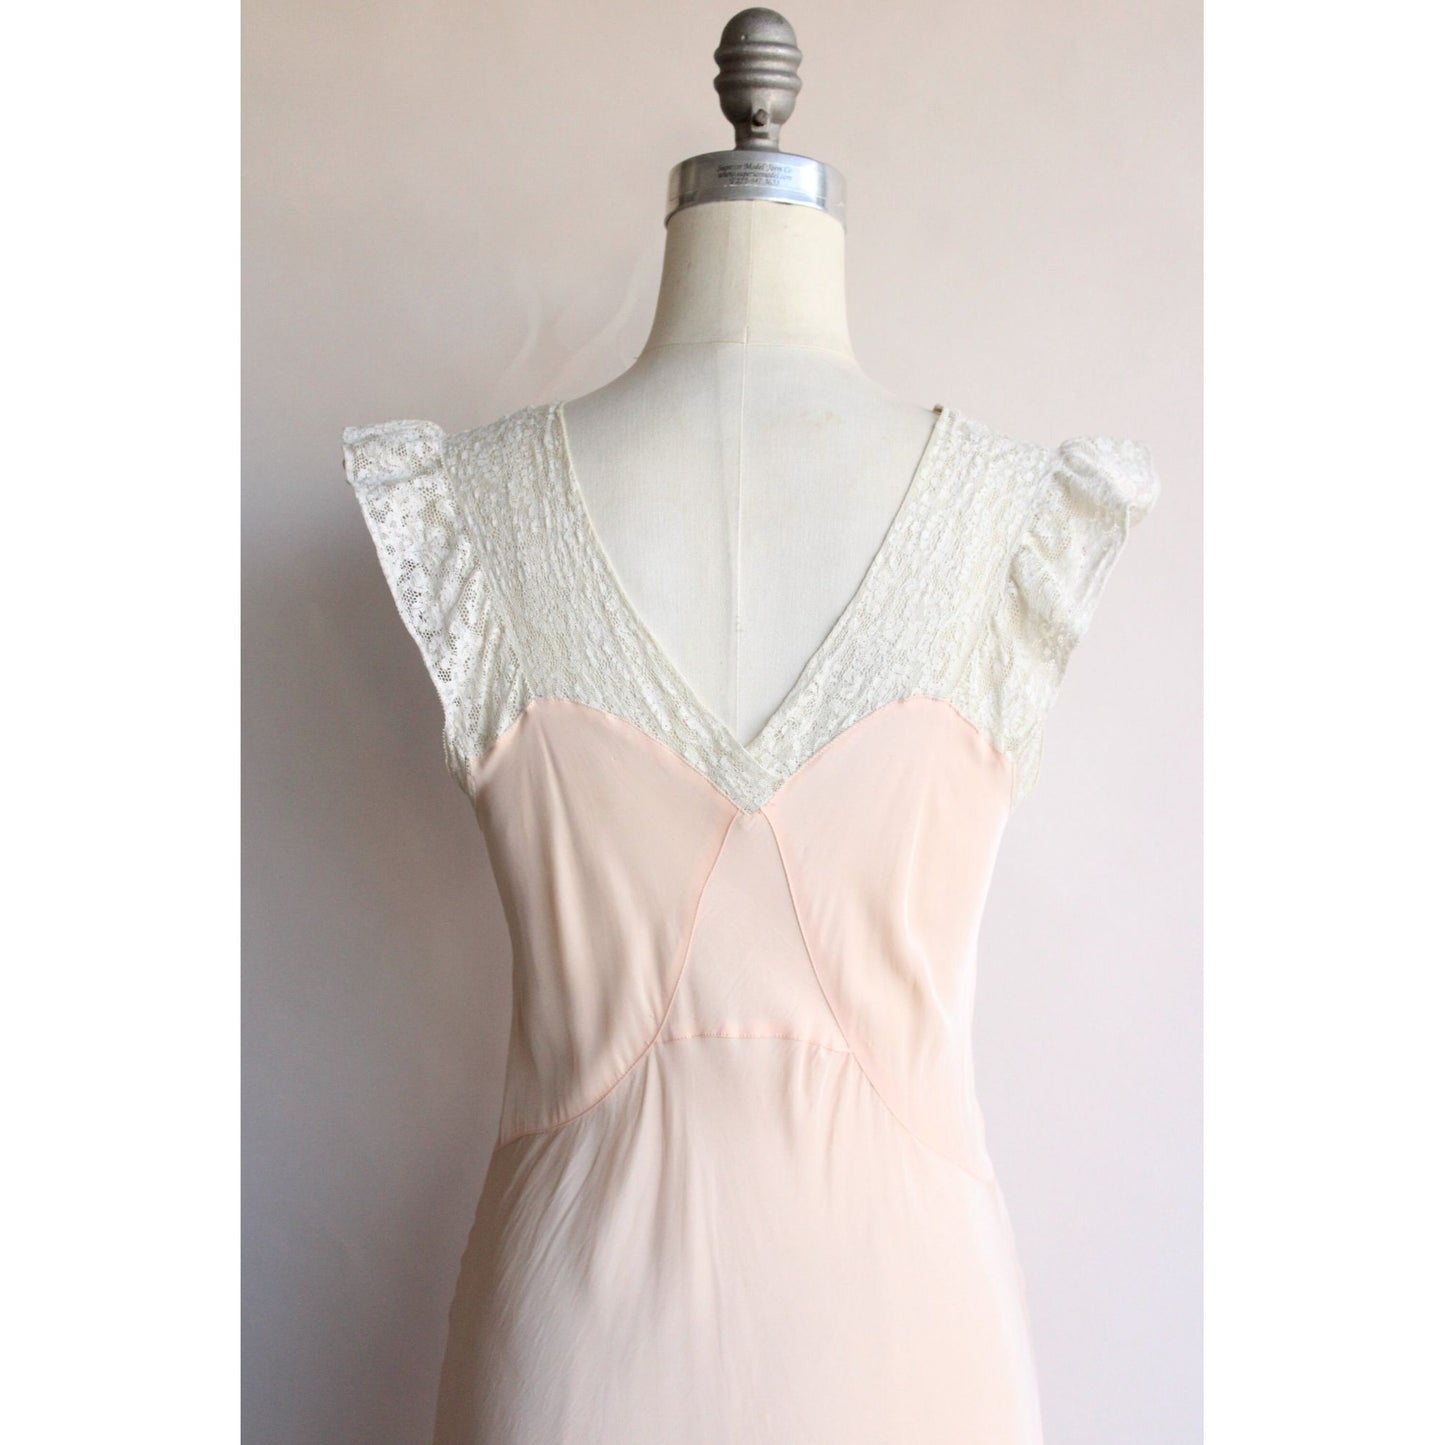 Vintage 1940s 1950s Pink Satin With White Lace Trim Nightgown